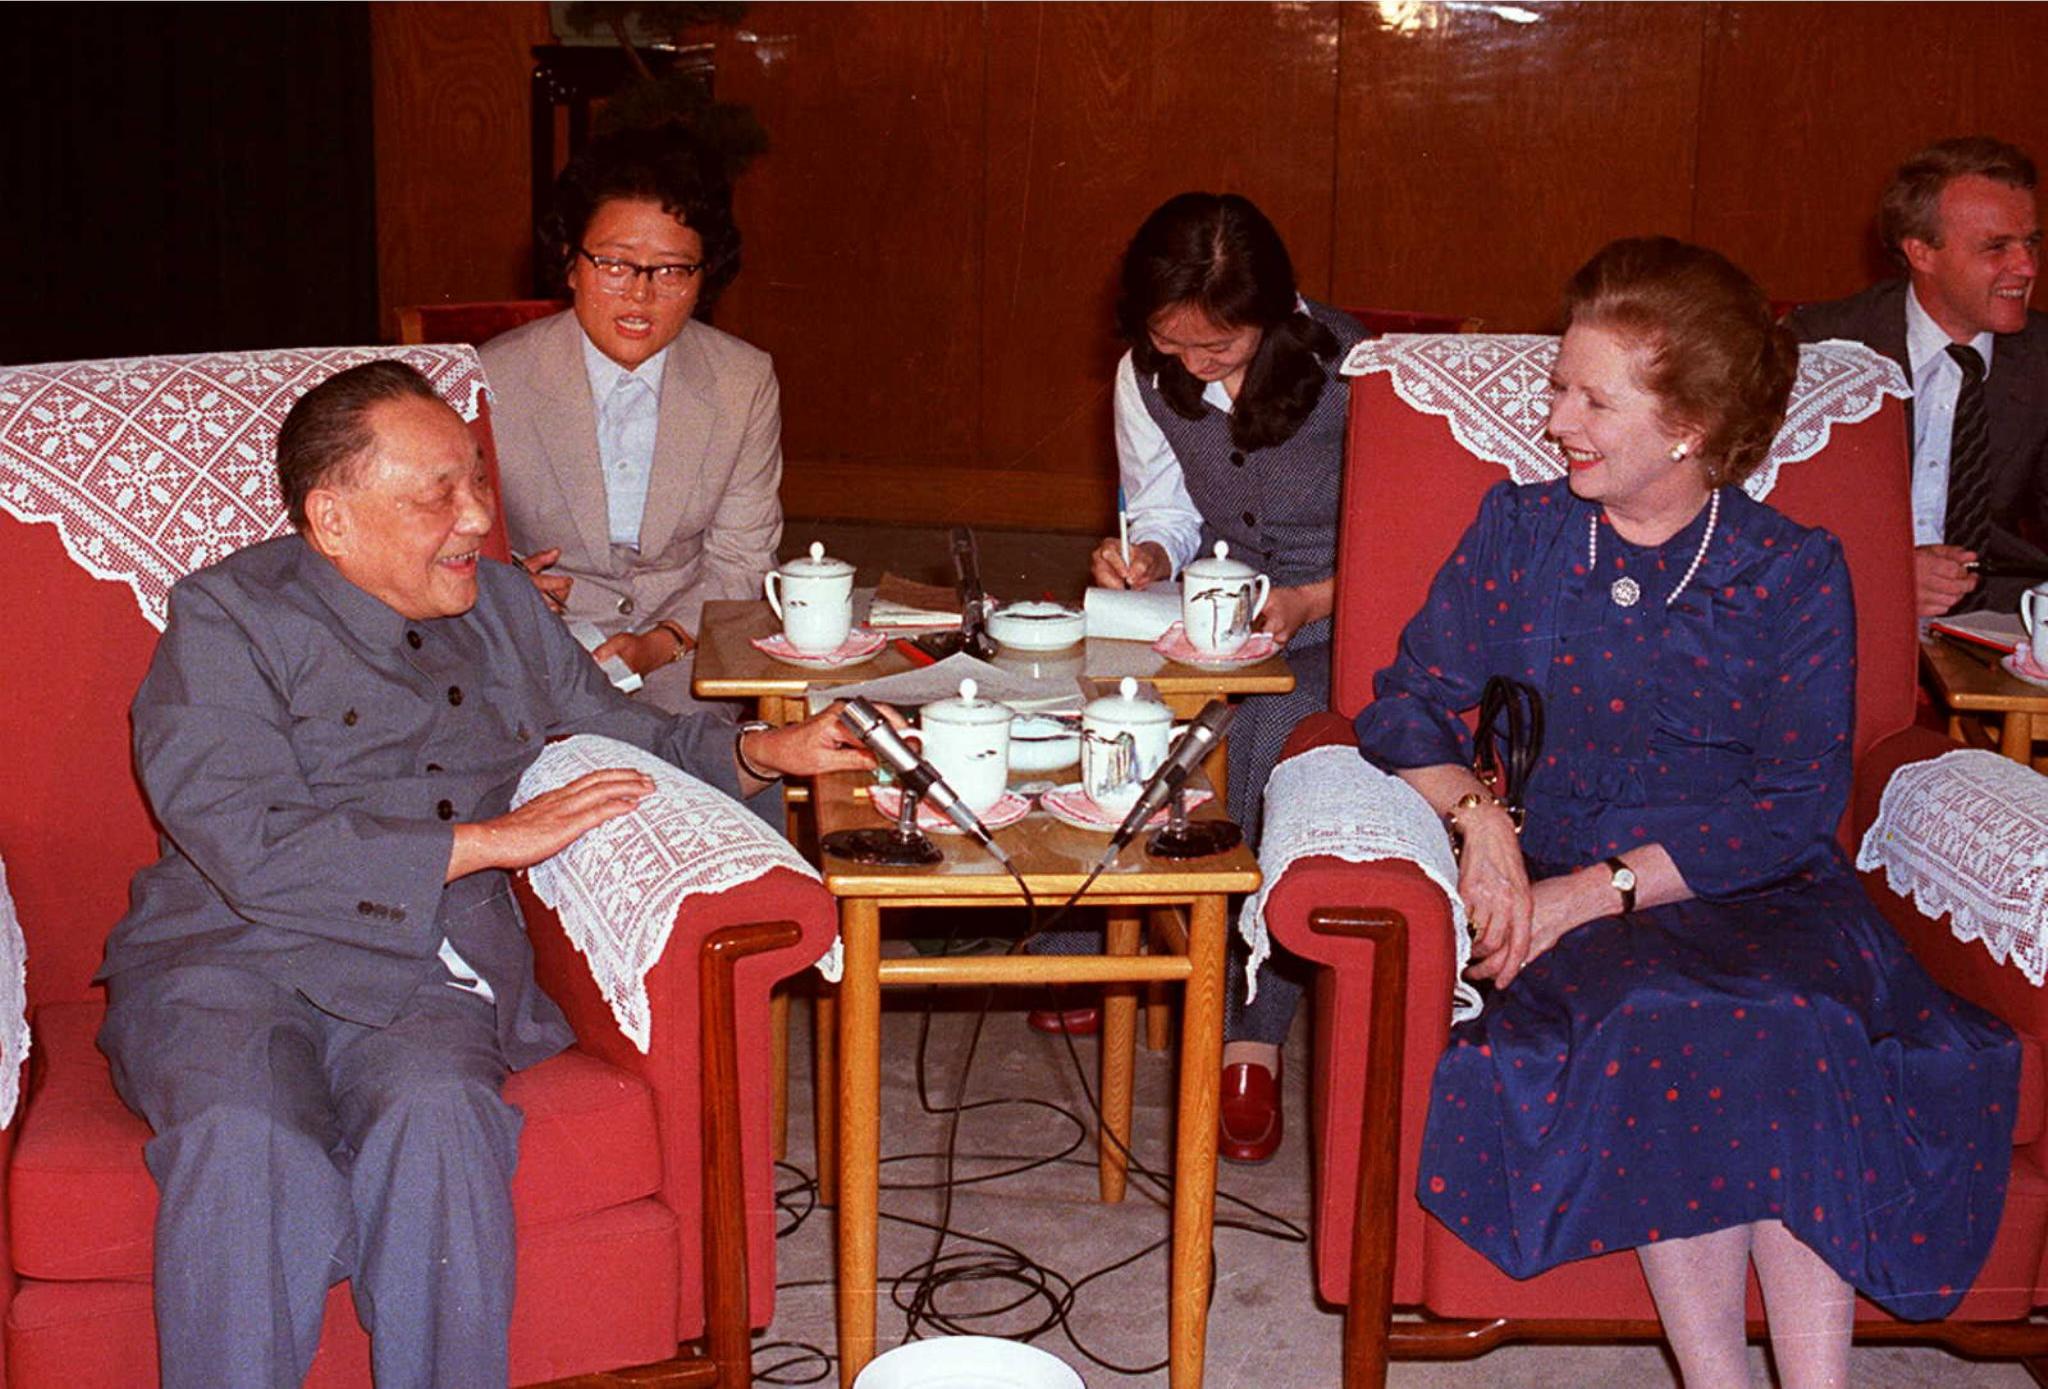 Chairman of the Chinese Communist Party Central Advisory Committee, Deng Xiaoping (L) and British Prime Minister Margaret Thatcher (R) talk in a file photo dated 24 September 1982 at the Great Hall of the People in Beijing during one of their meetings leading up to the signing of the Sino-British Joint Declaration on the future of Hong Kong on 26 September in 1984, setting up the territory as a Special Administrative Region of China. . CHINA OUT / AFP / XINHUA / STR (Photo credit should read STR/AFP via Getty Images)